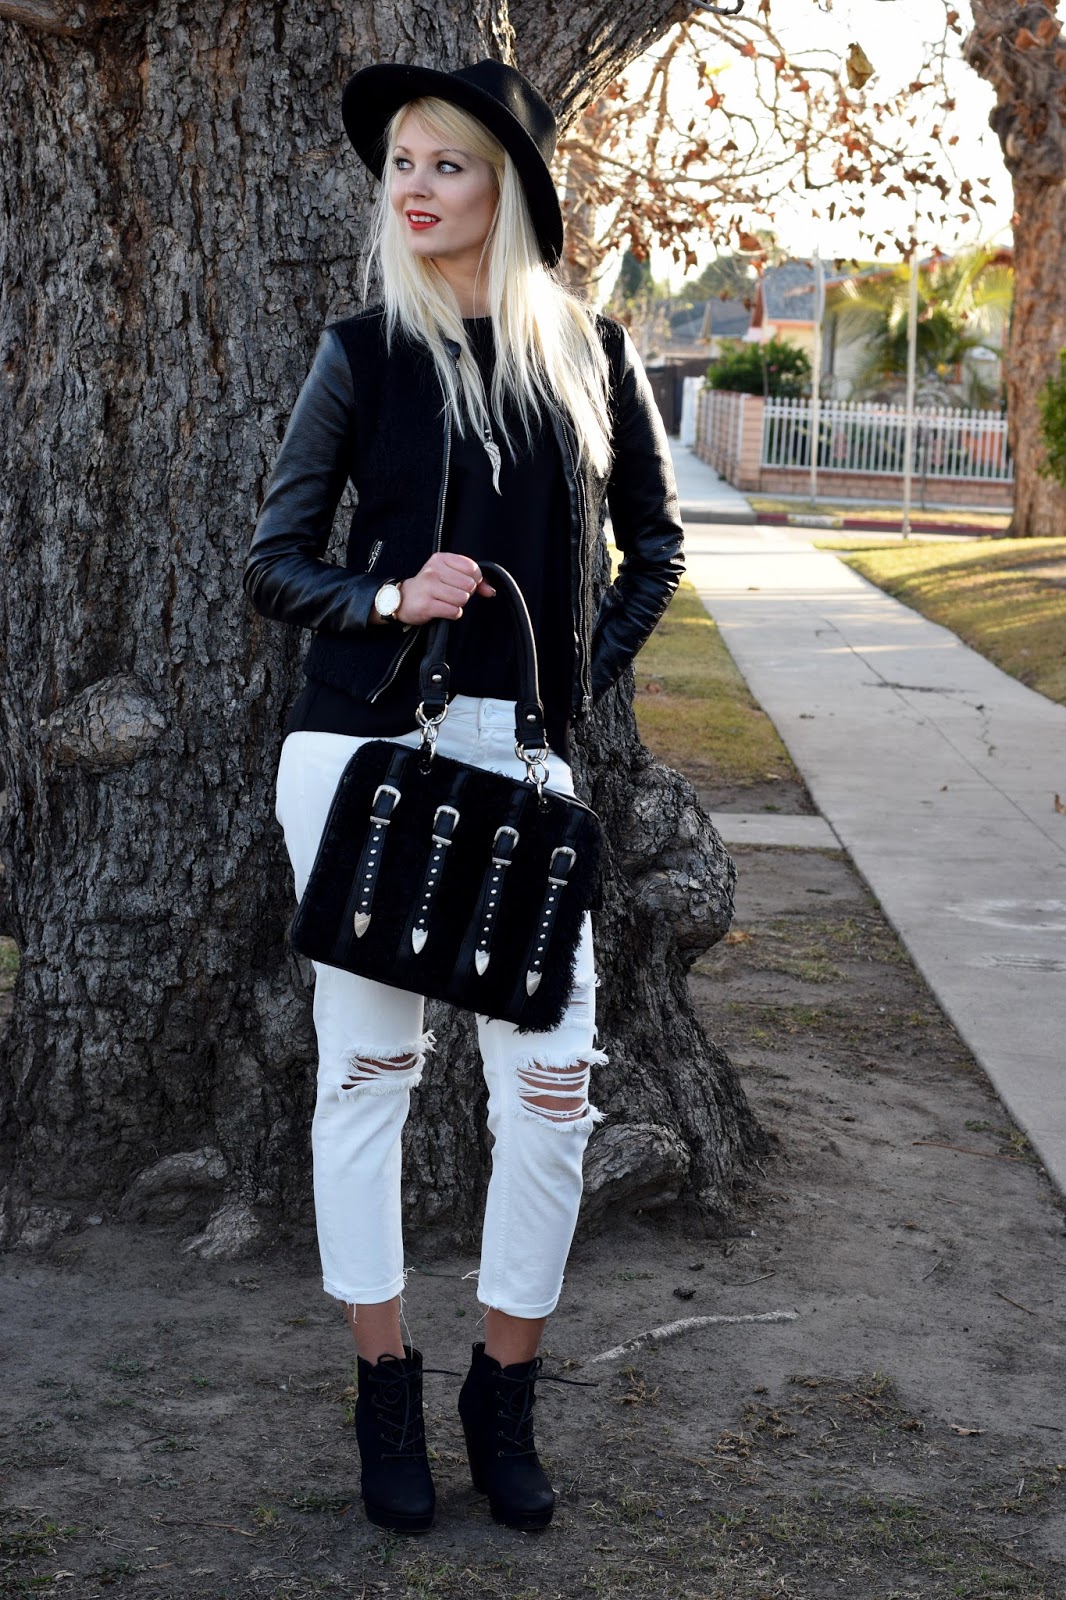 nicole lee, nicole lee purse, purse, fluffy purse, black and white, bw look, new year